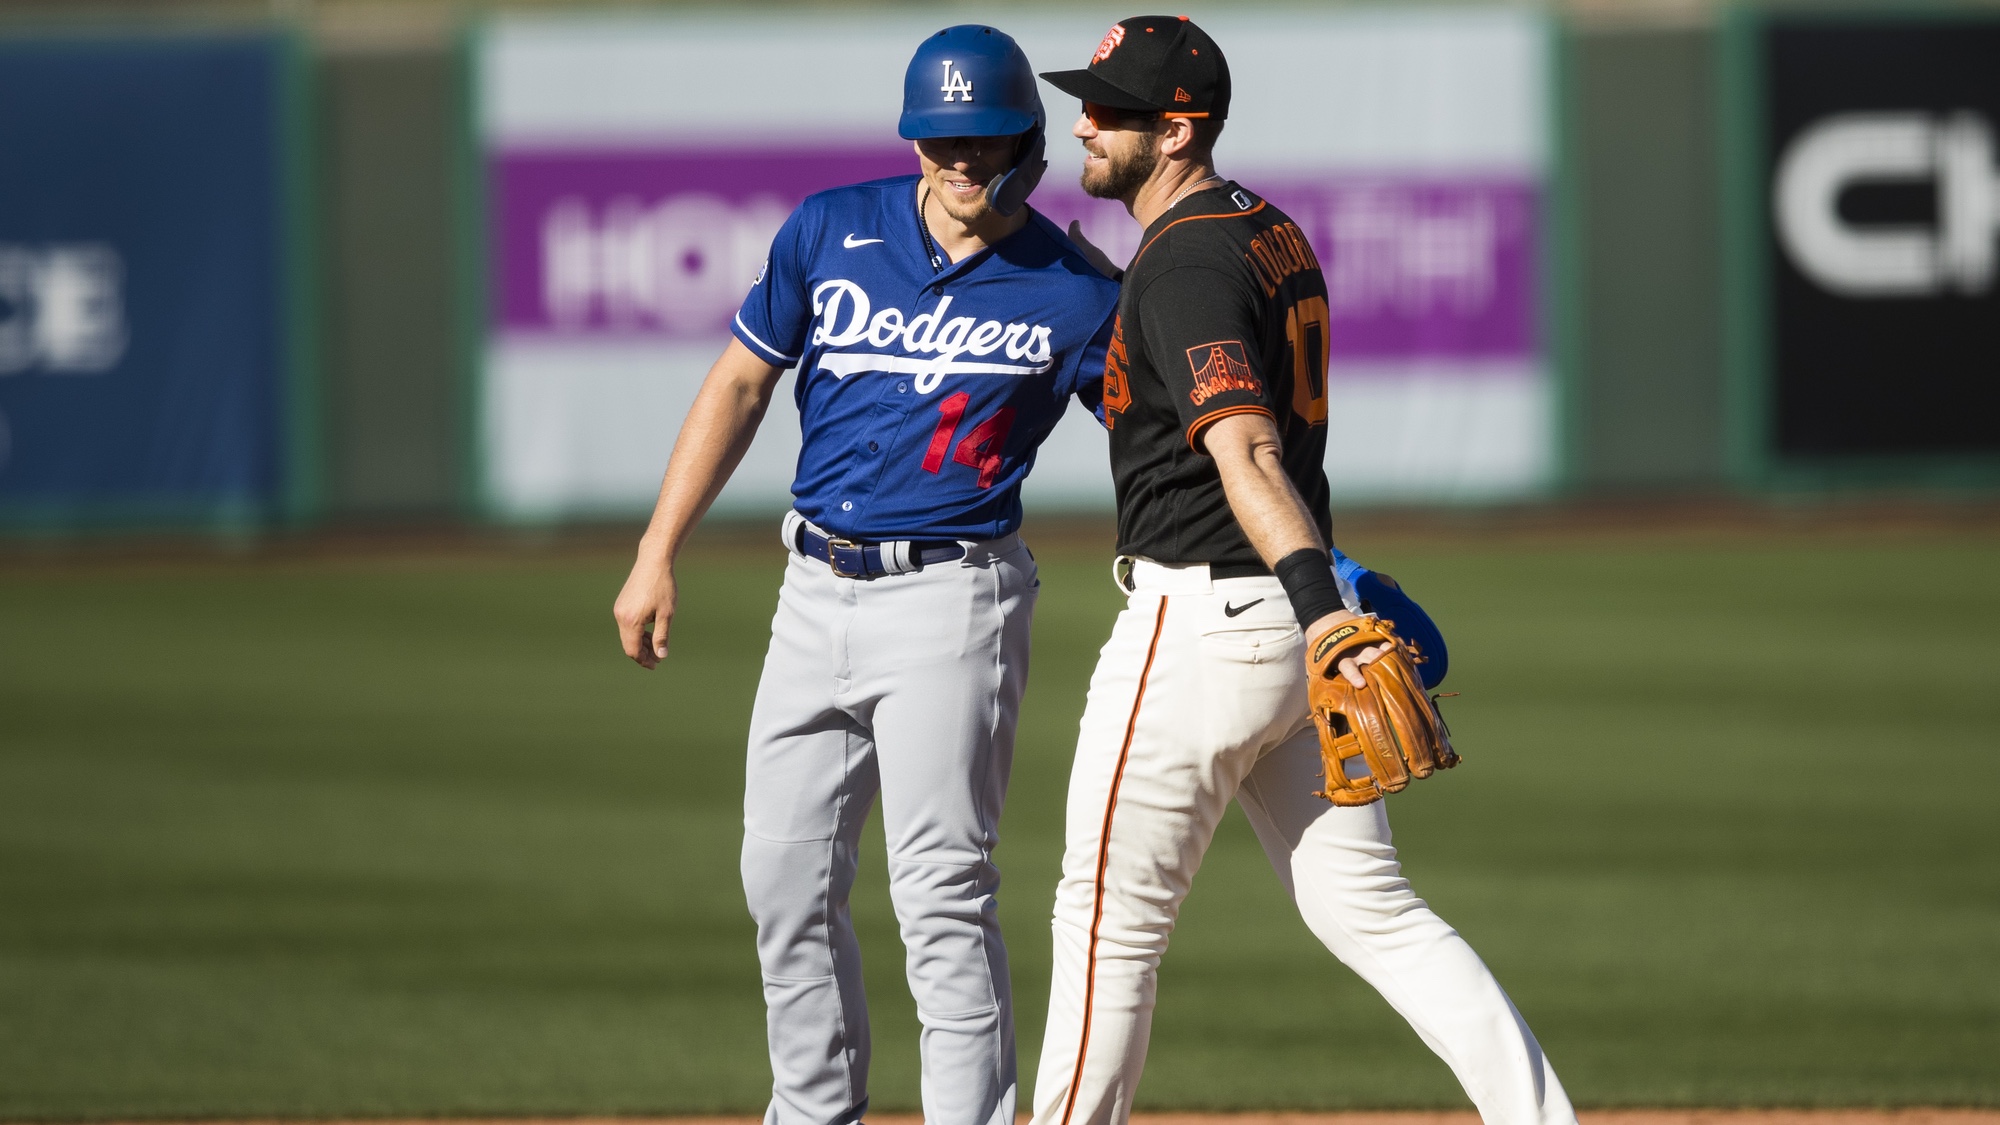 Giants vs Dodgers live stream How to watch the MLB 2020 opening night Toms Guide